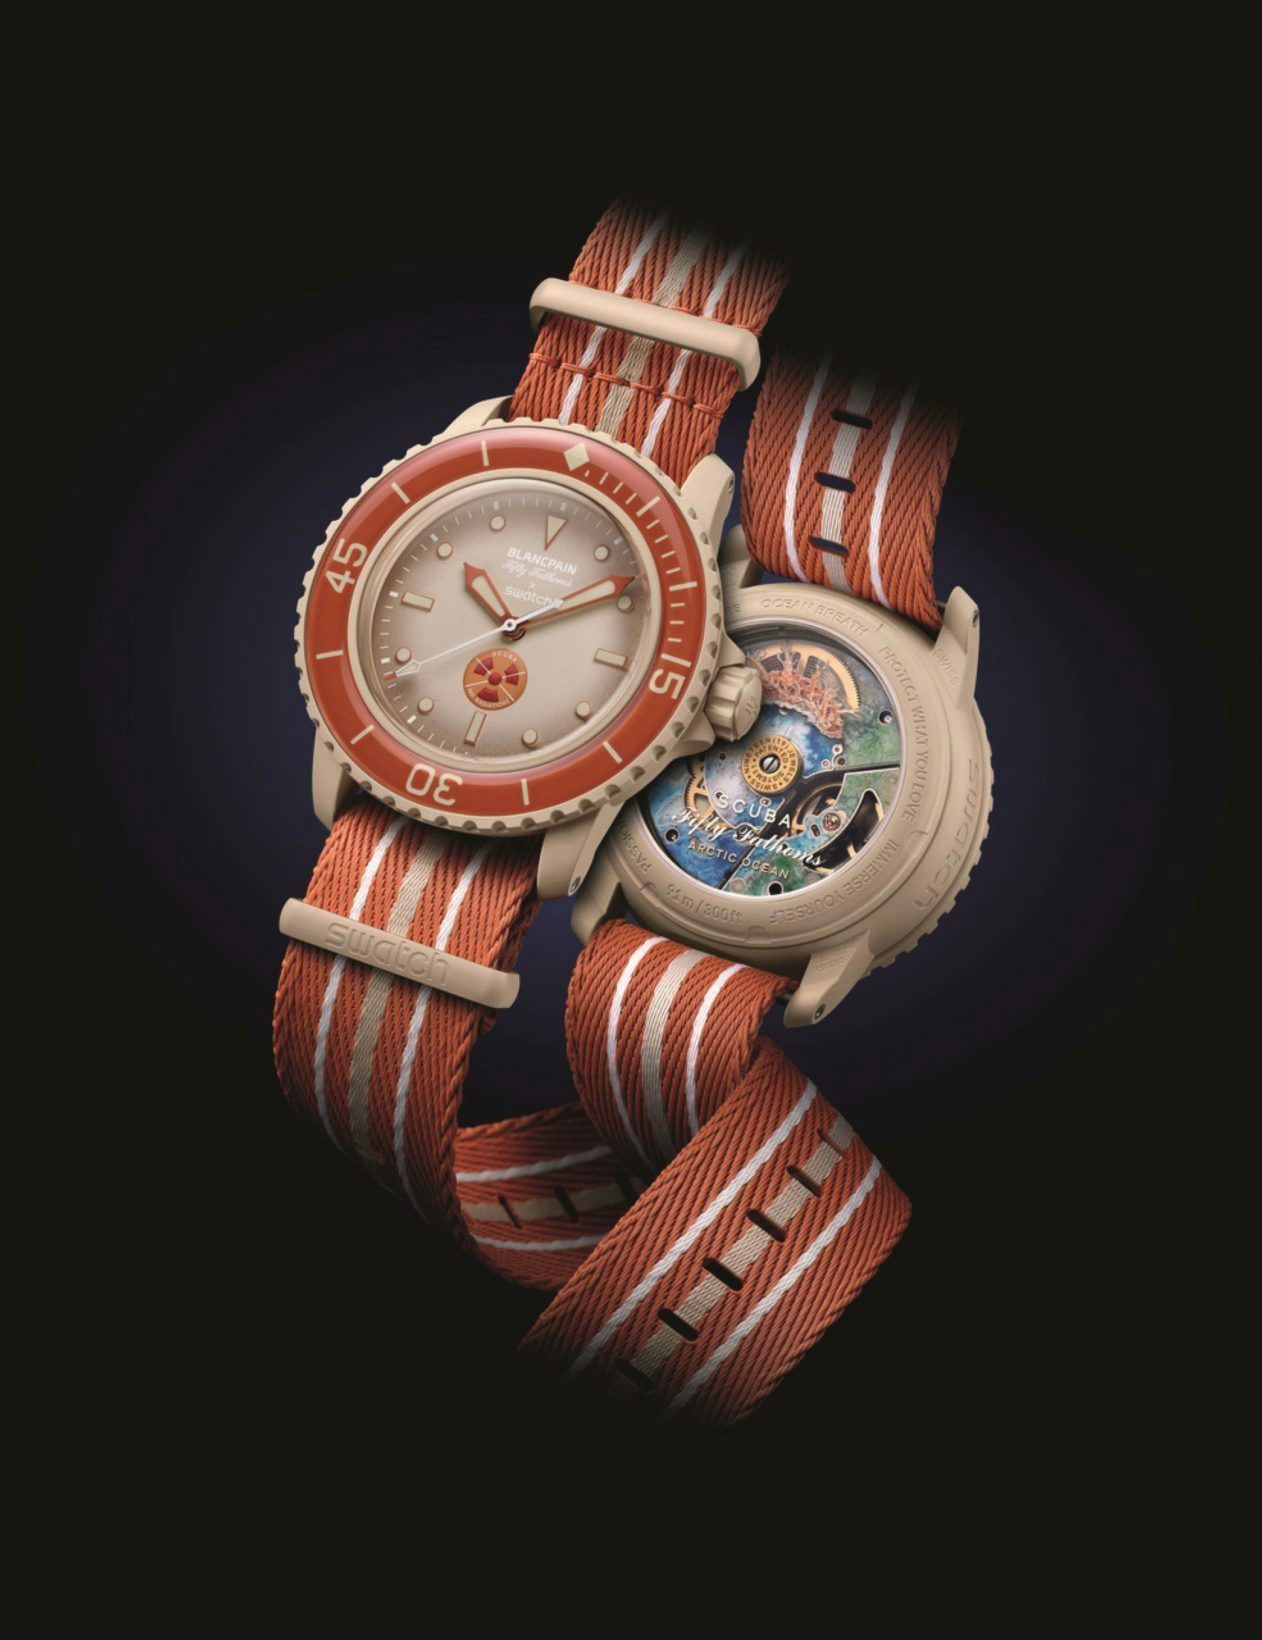 Swatch launches a new collection with Blancpain